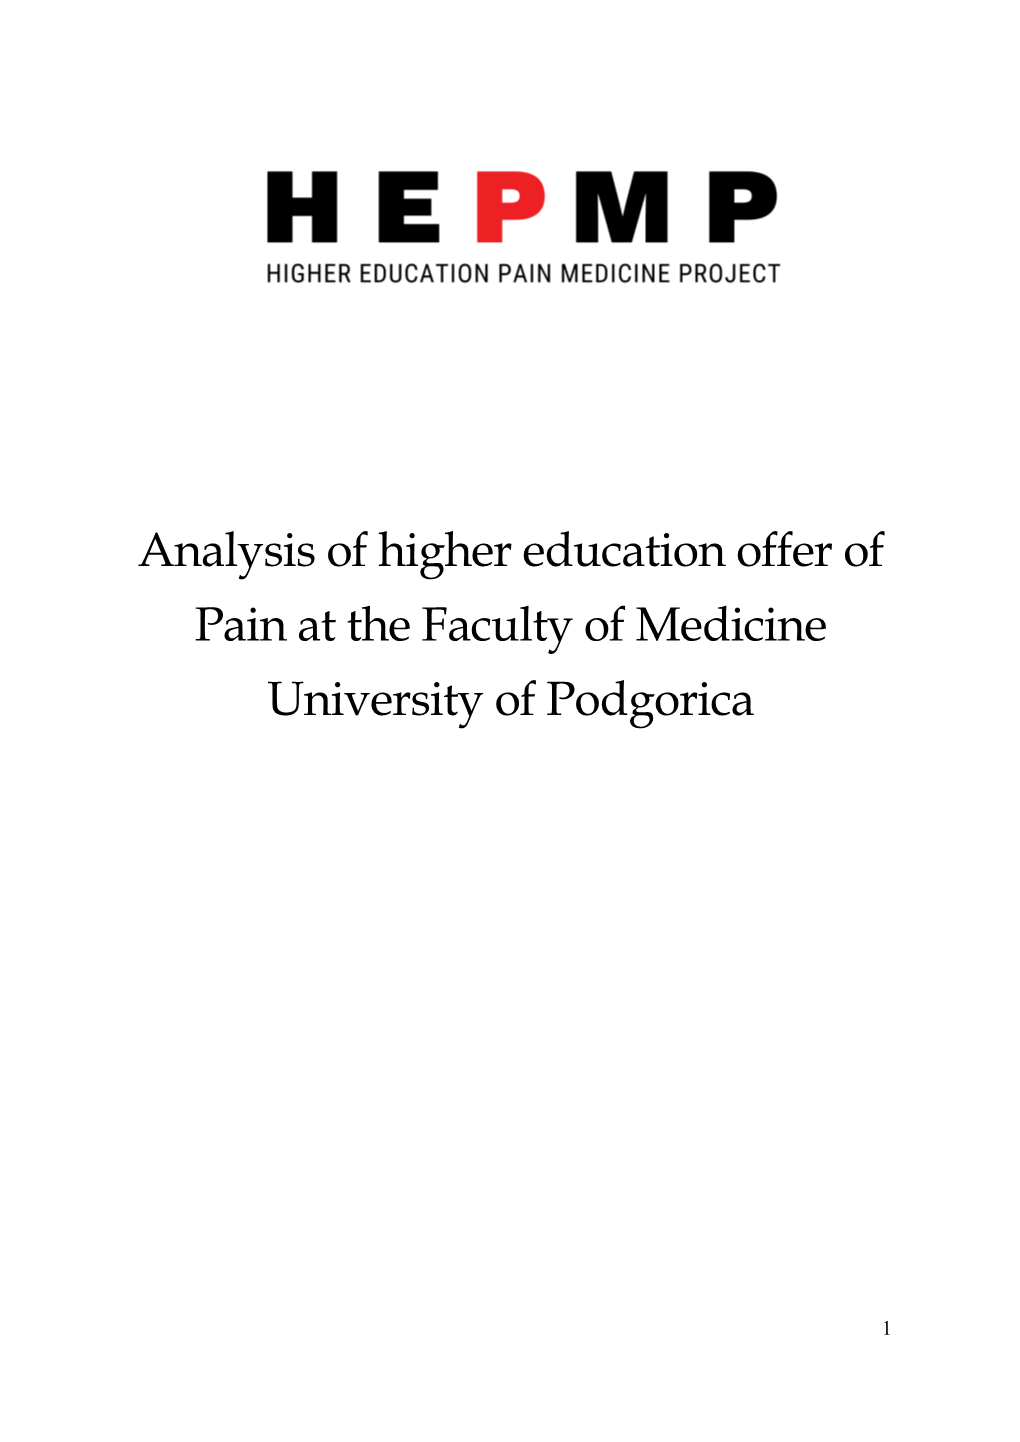 Analysis of Higher Education Offer of Pain at the Faculty of Medicine